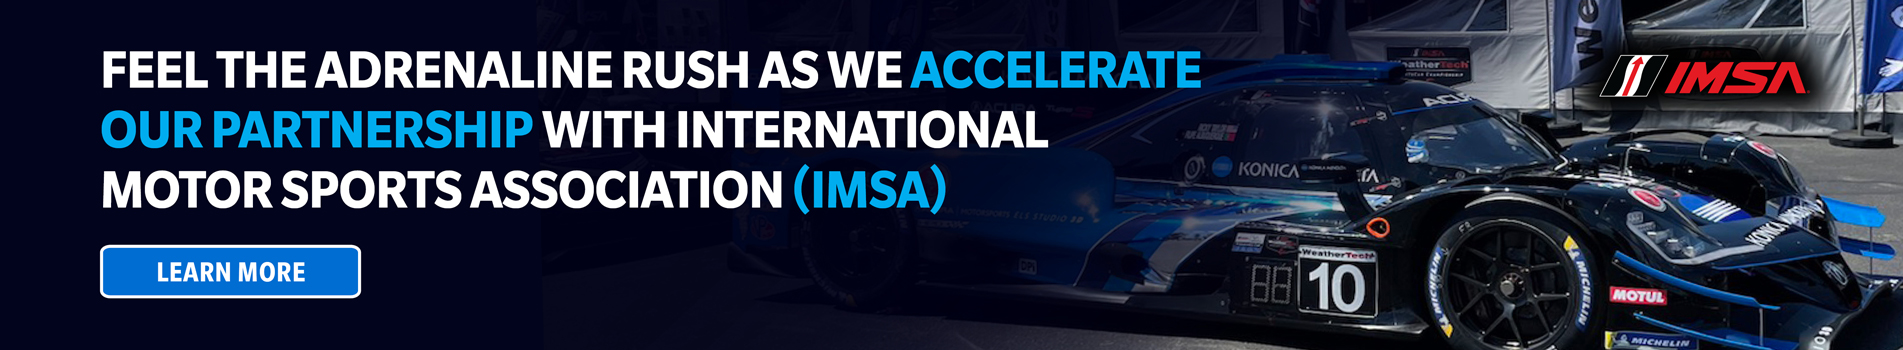 Feel the adrenaline rush as we accelerate our partnership with IMSA